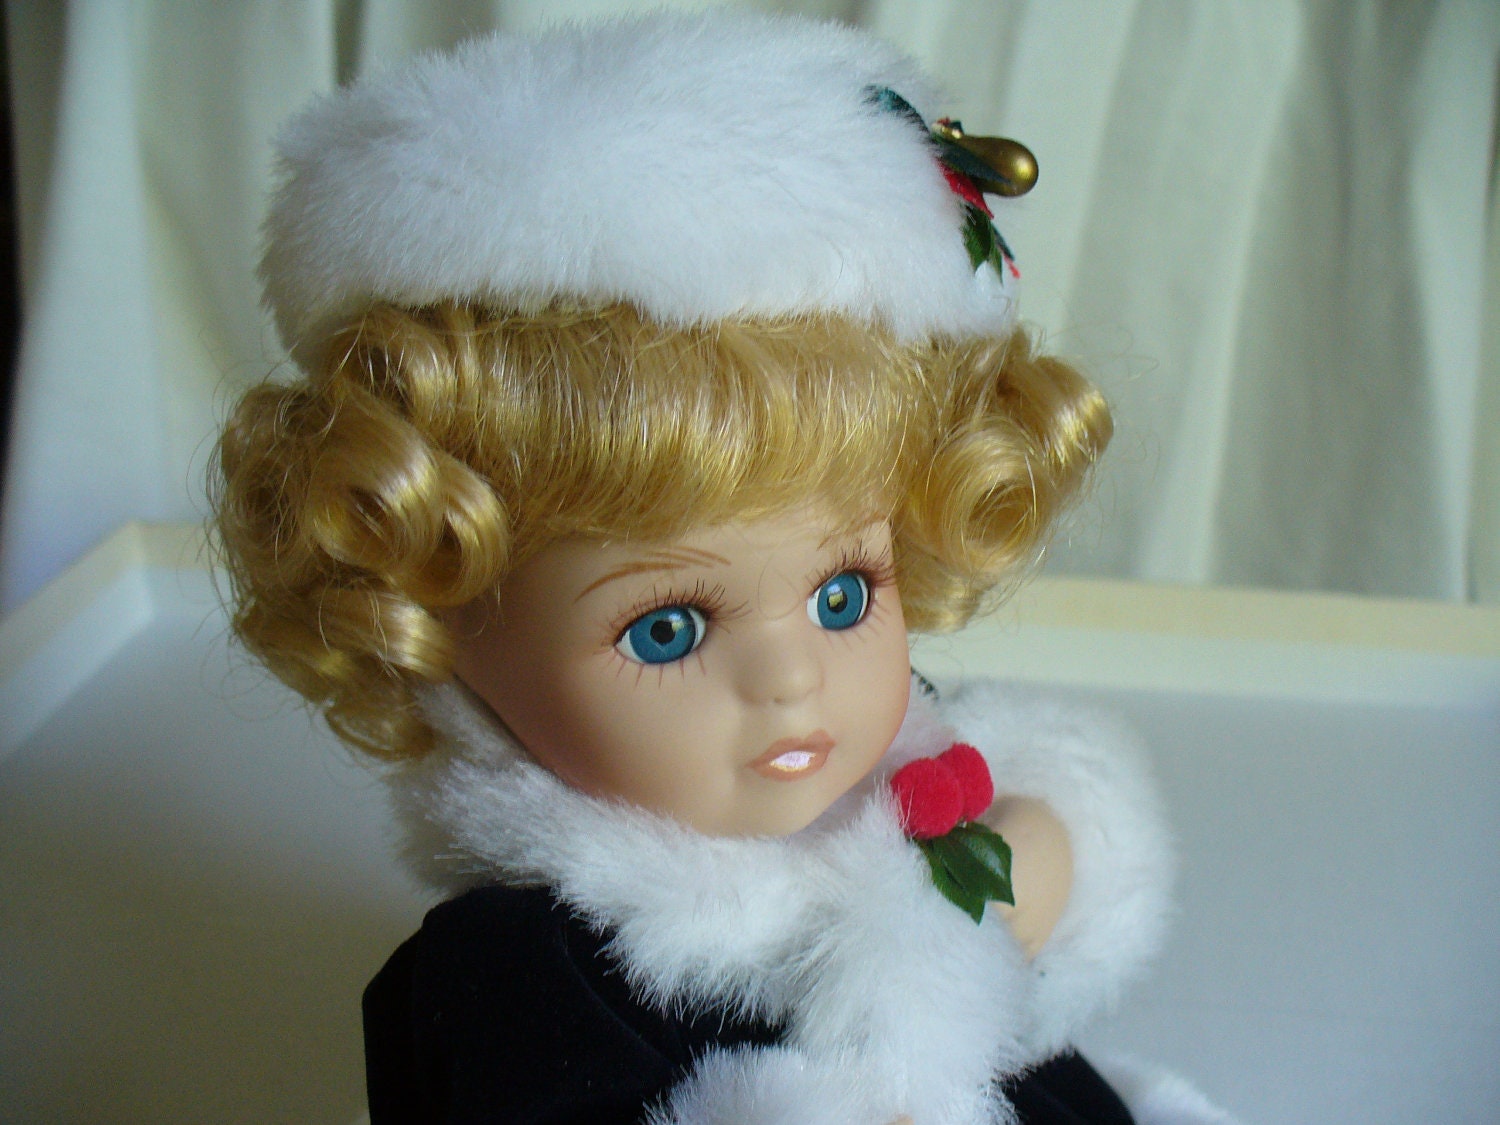 Christmas Porcelain Doll.  Blue Eyed Porcelain Doll with Blonde Hair.  Vintage. Collectibles. CIJ